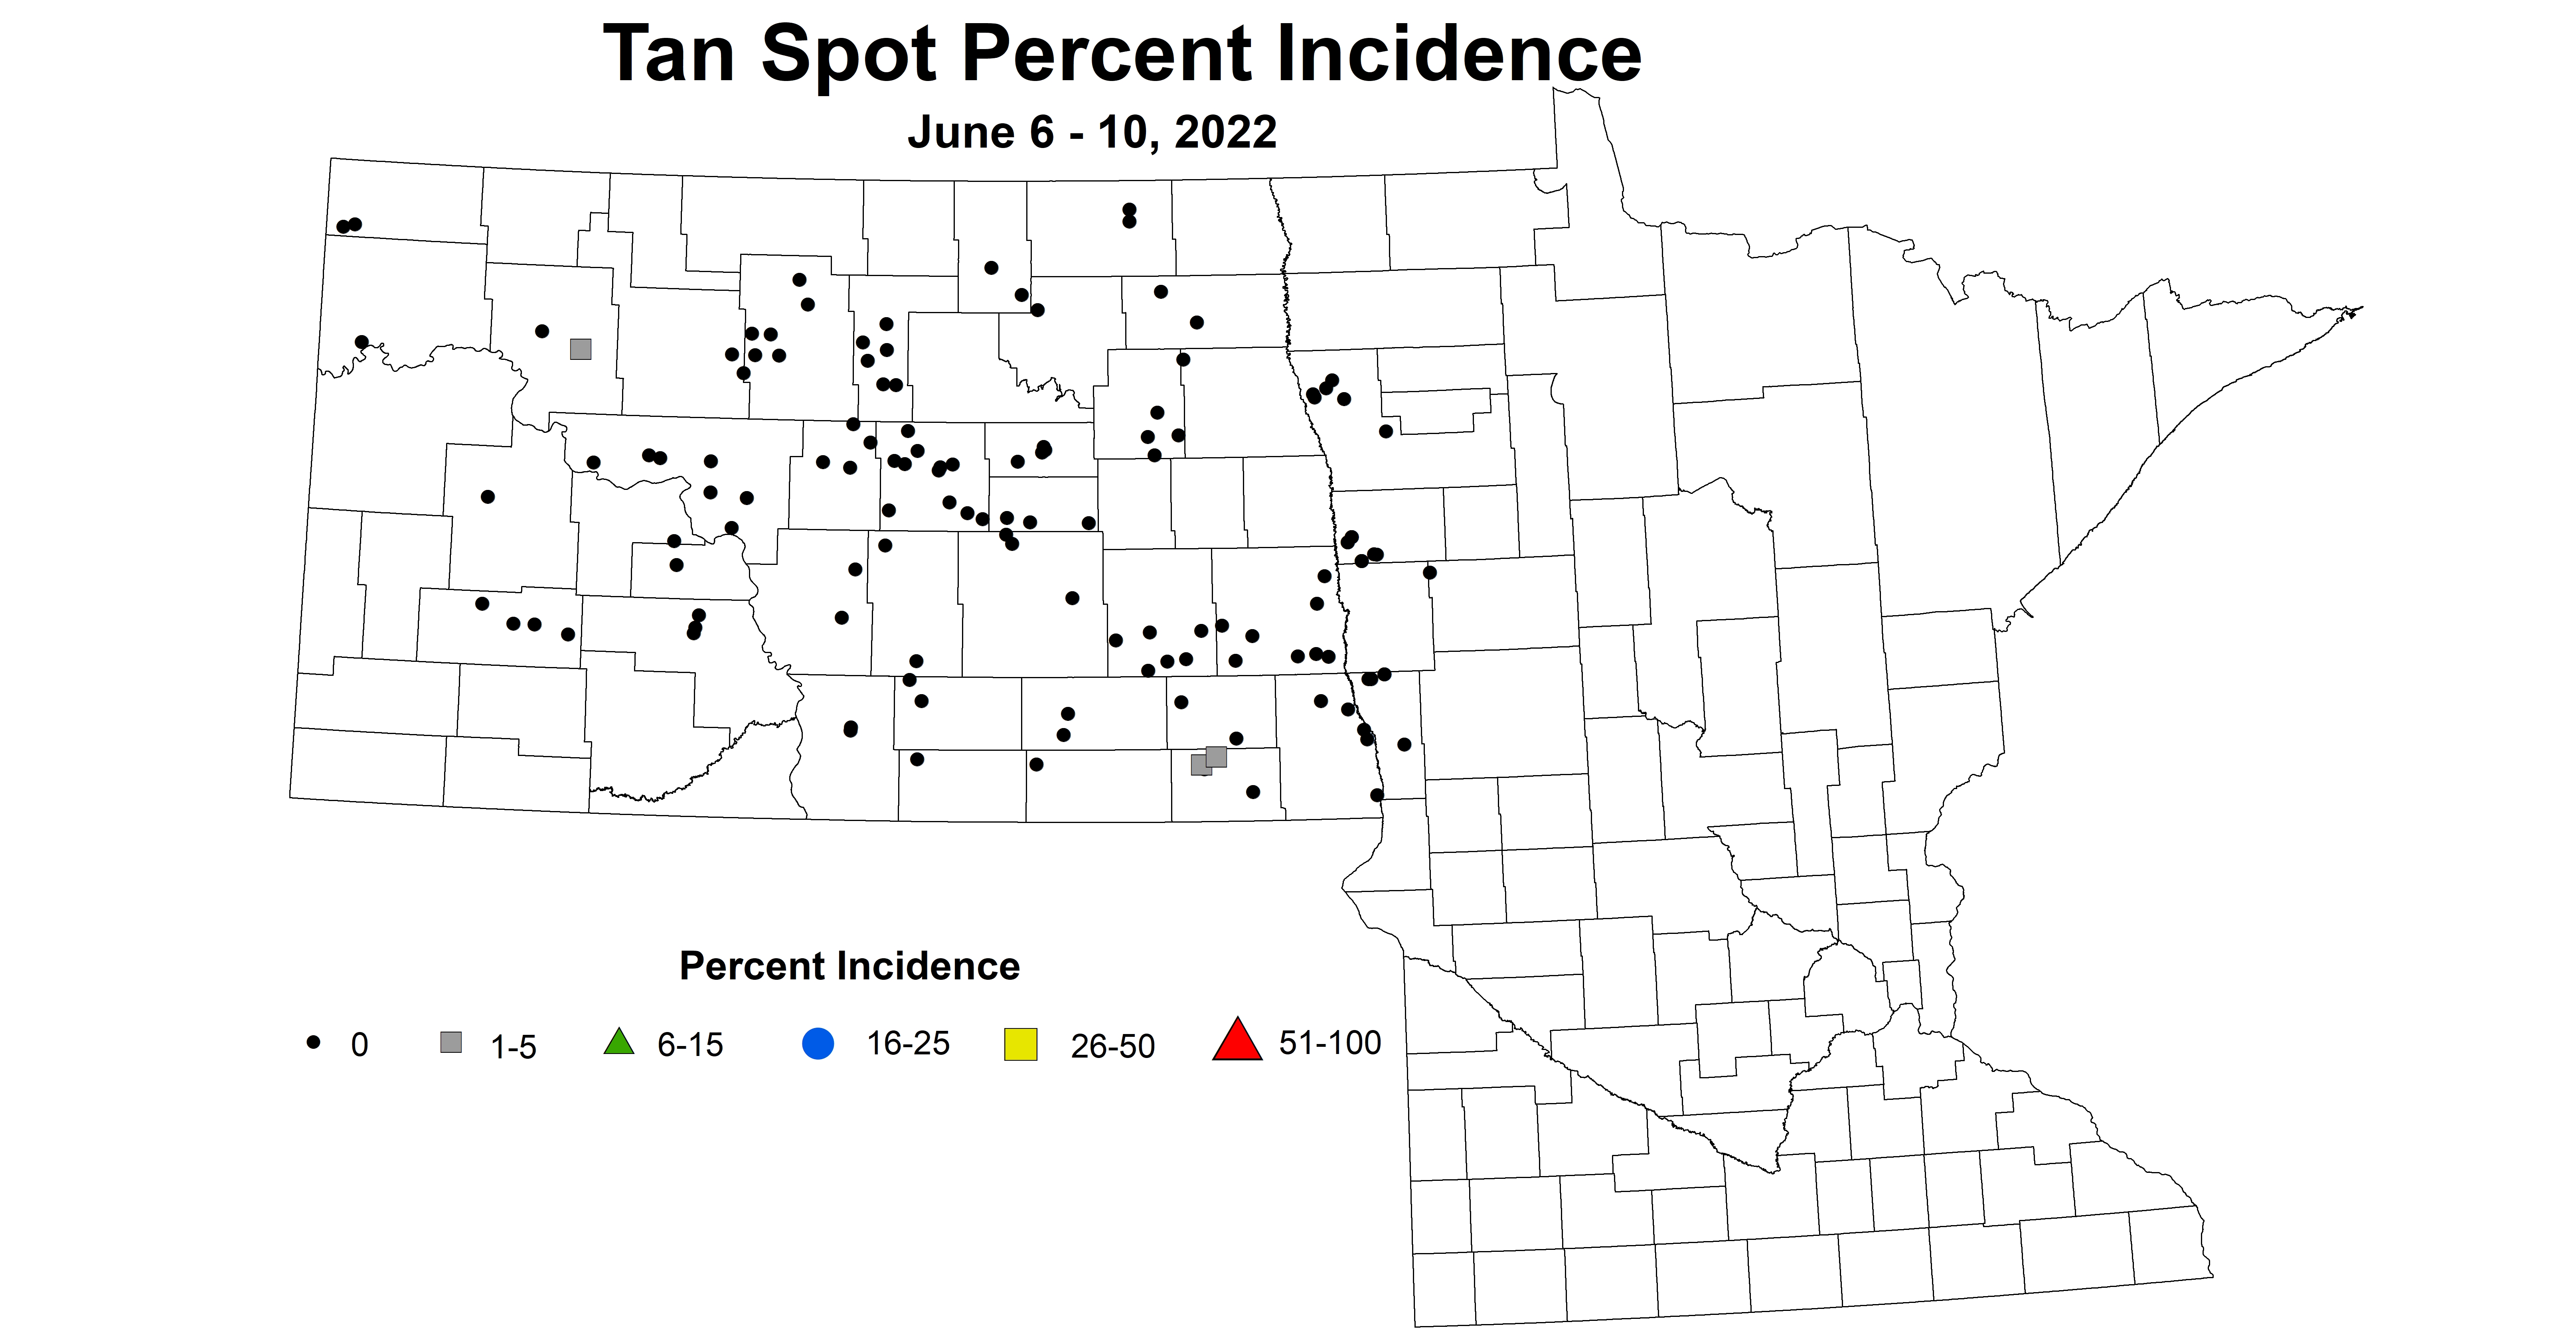 ND IPM map of wheat tan spot incidence June 6-10, 2022